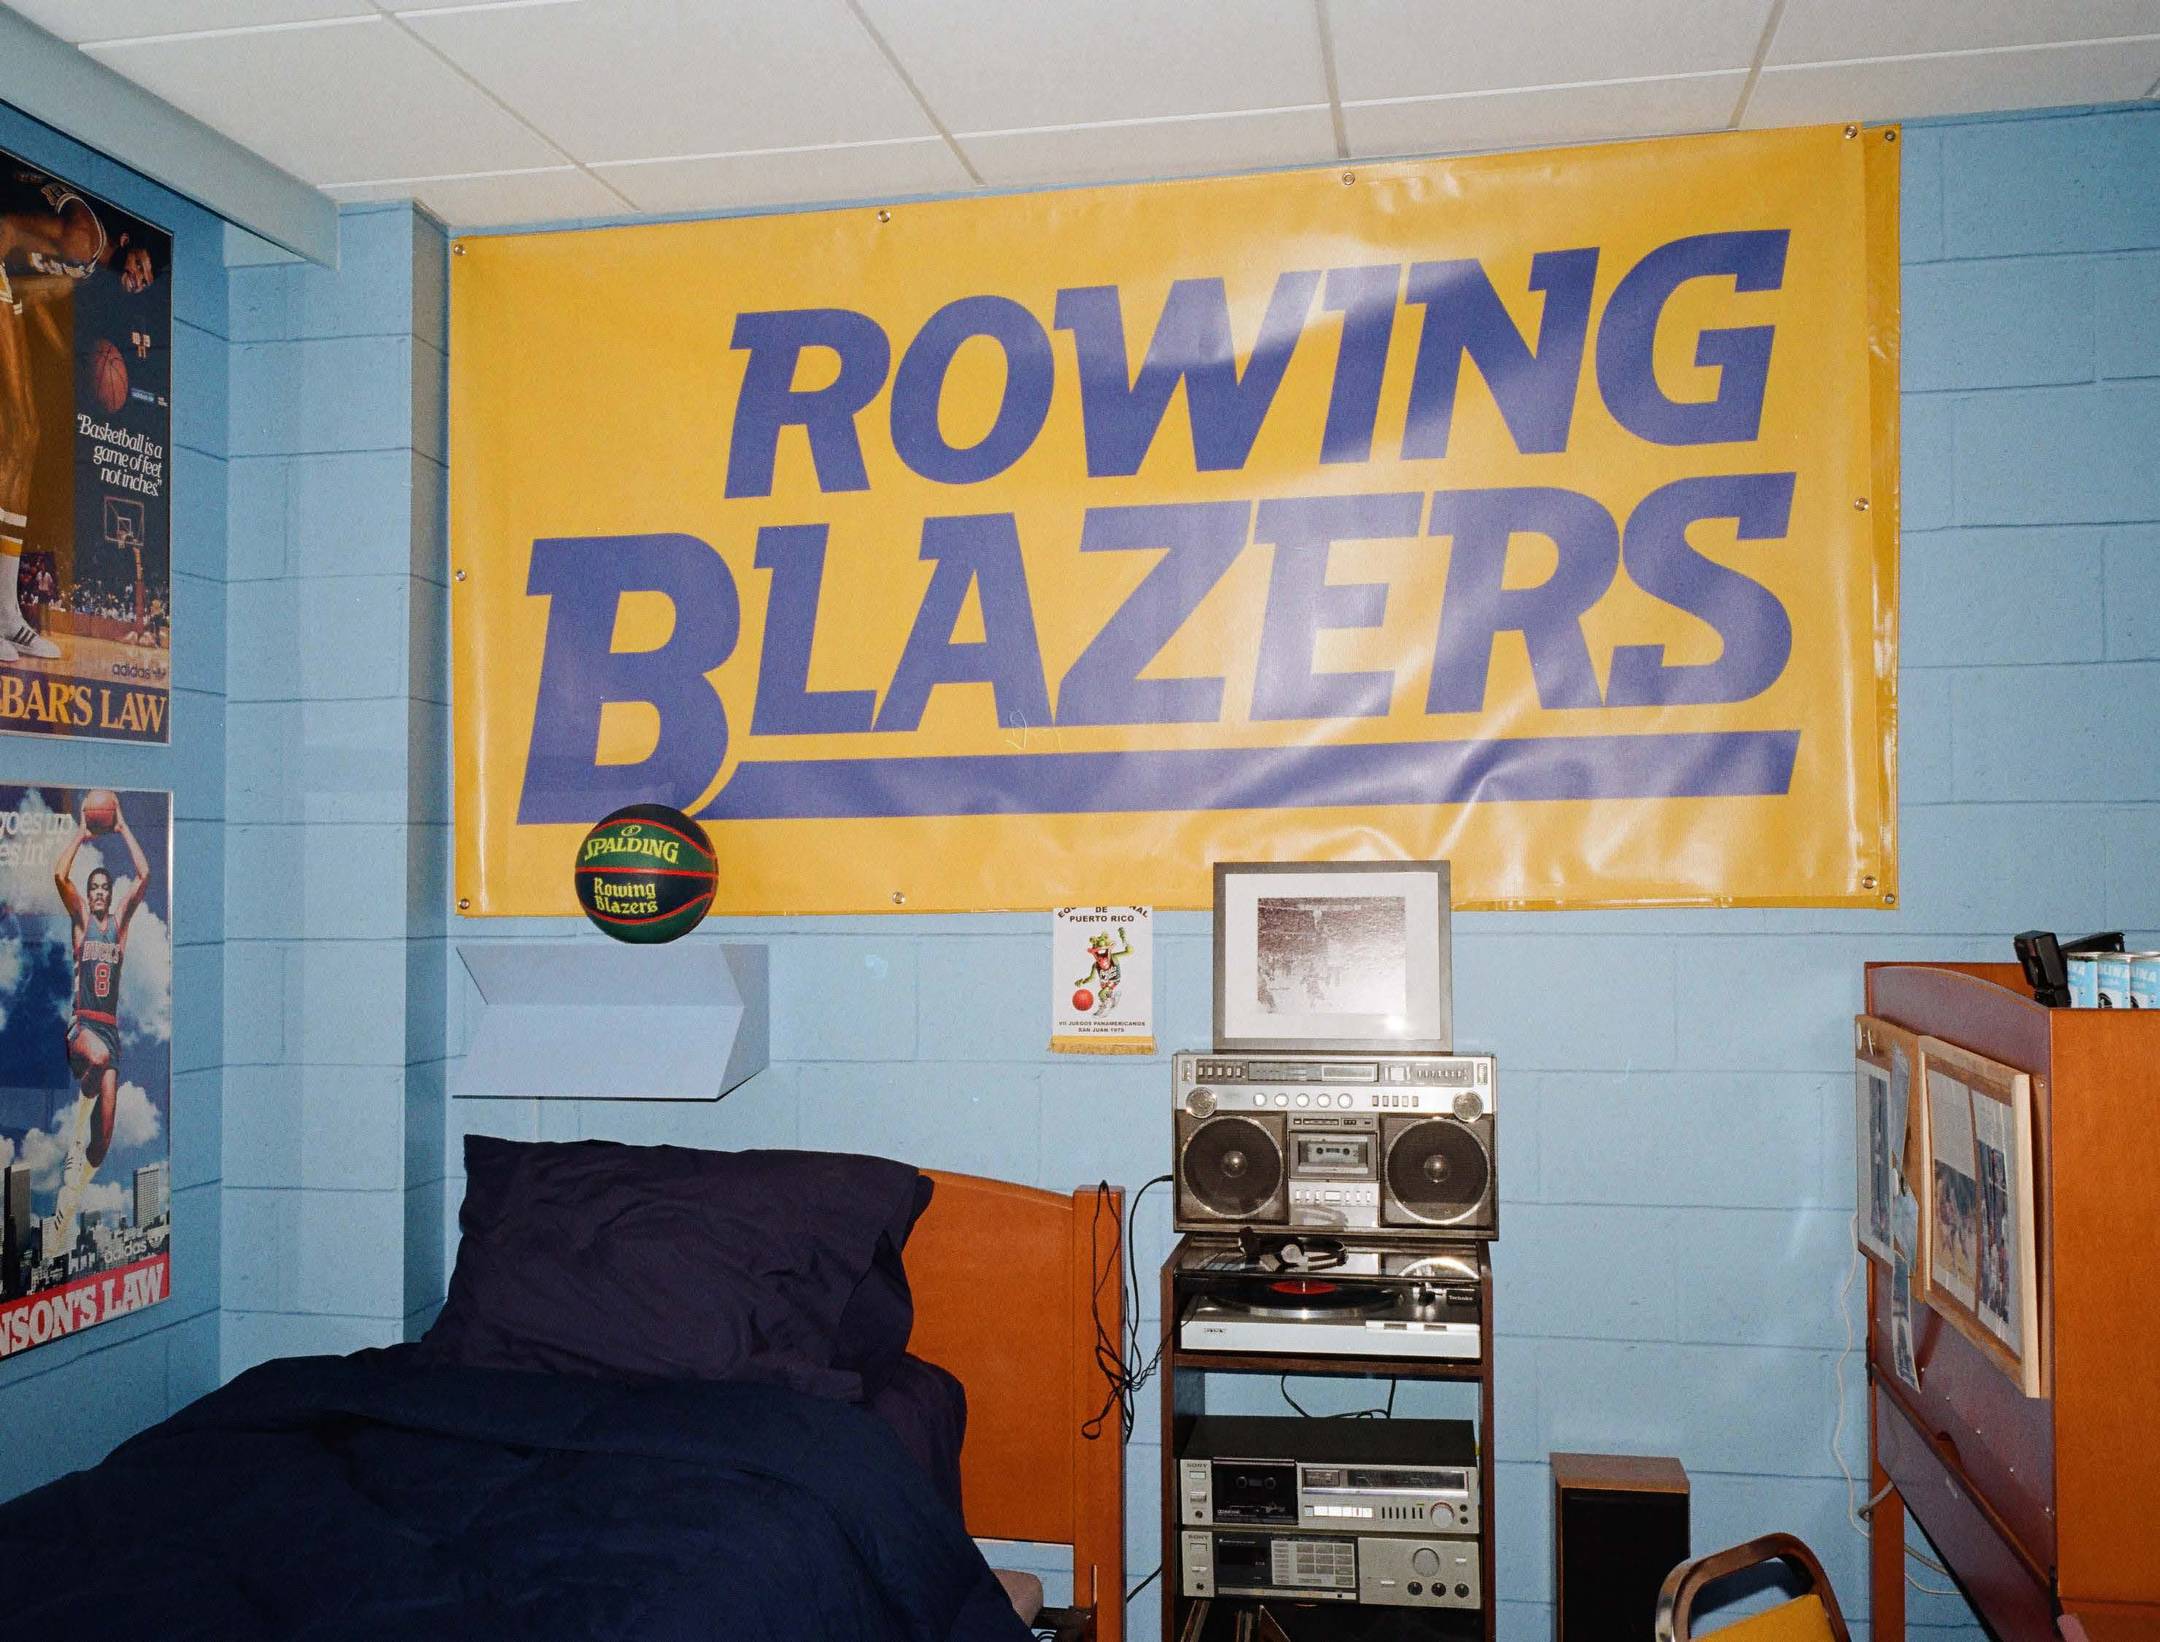 A recreation of one of Rowing Blazers' favorite player's freshman dorm room located at The Graduate Chapel Hill. Pictured is a large Rowing Blazers banner and the Limited Edition Spalding Basketball.